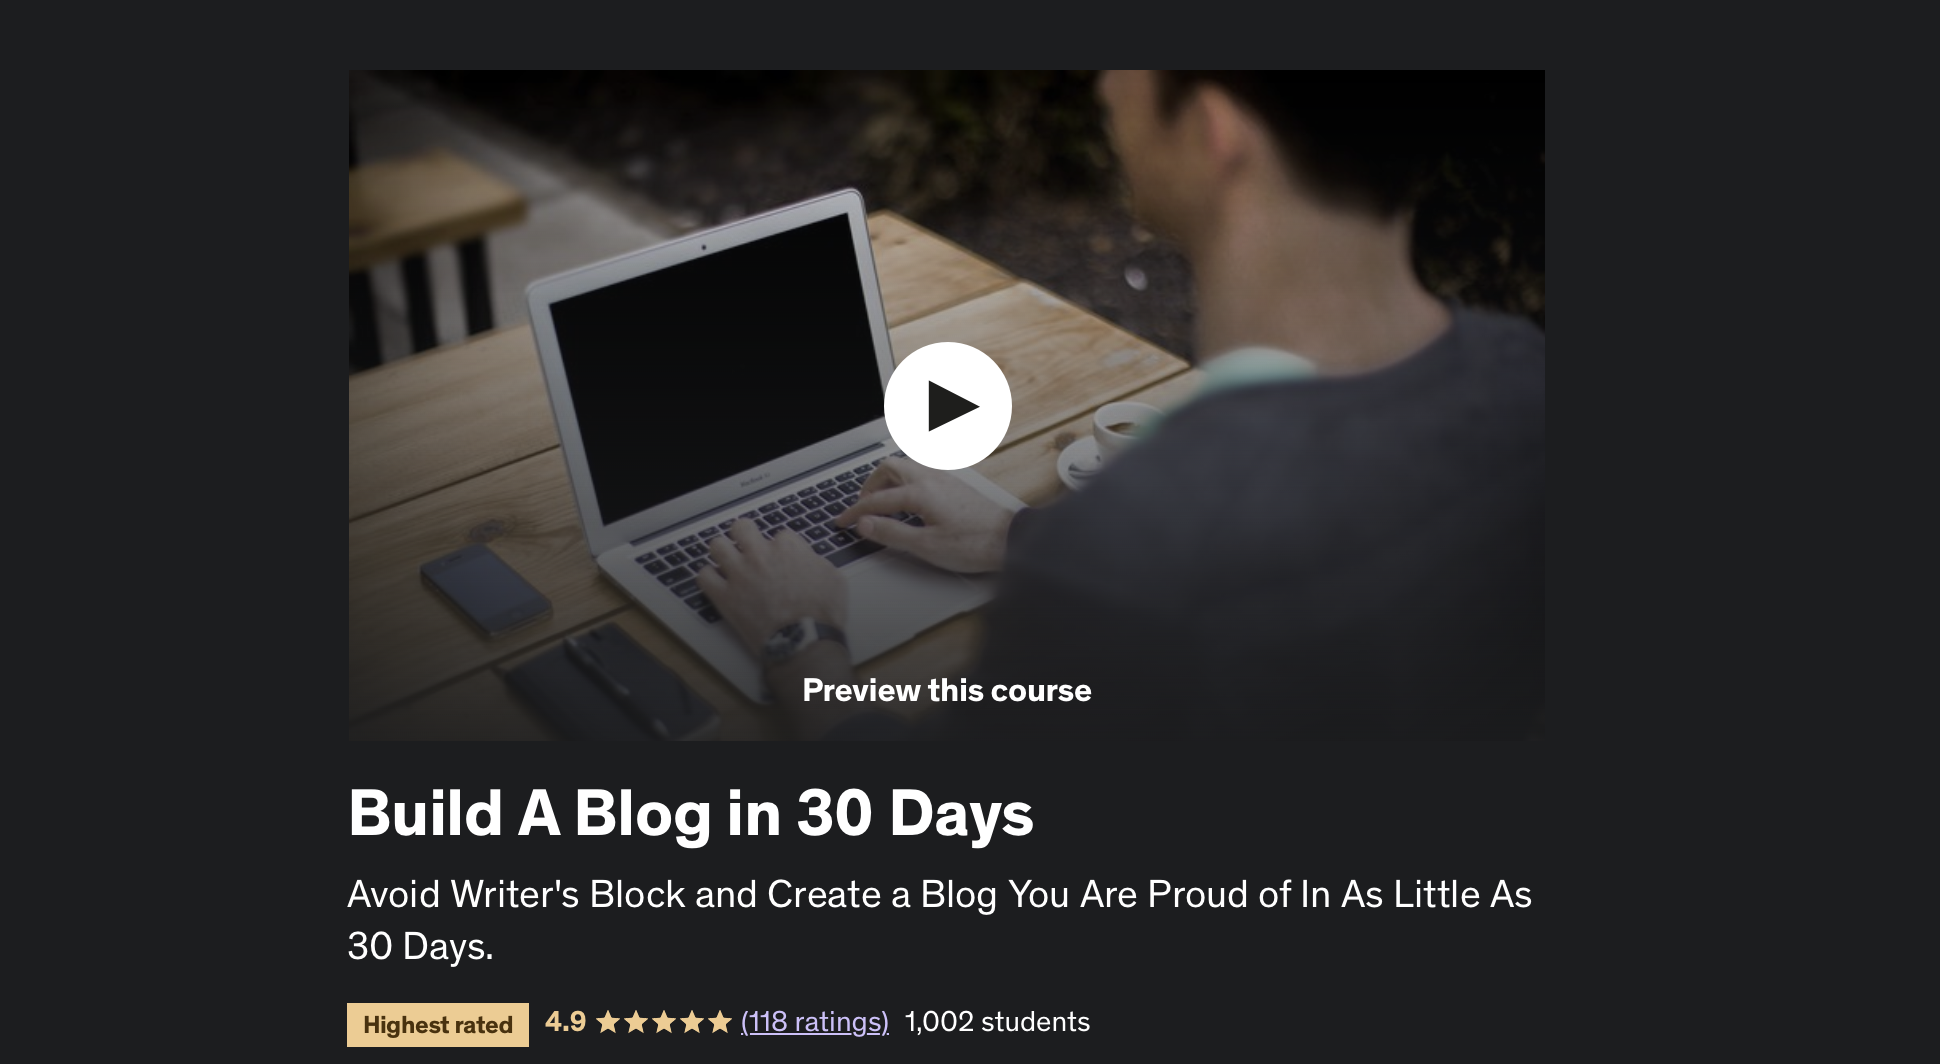 Build a Blog in 30 Days